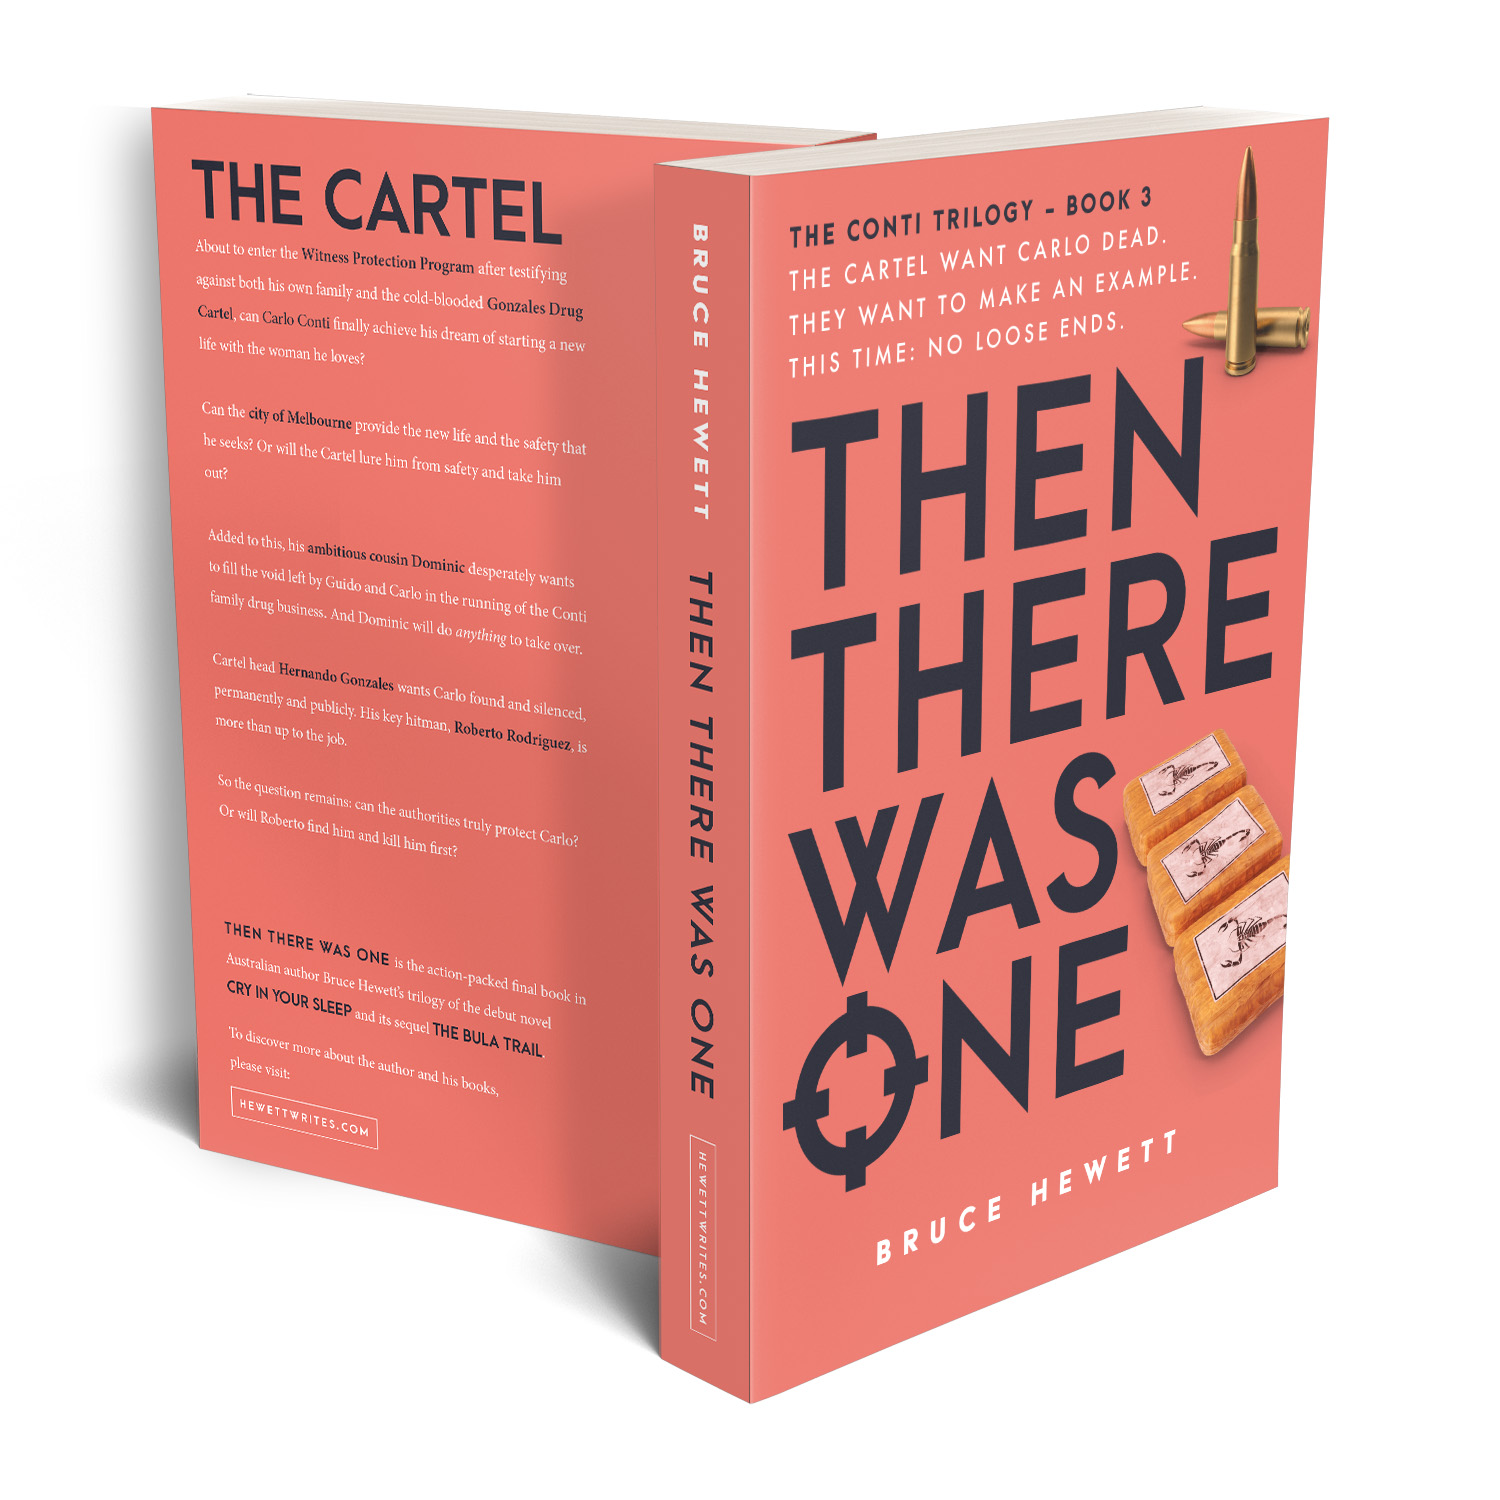 'Then There Was One' is the final instalment in an Australia-set, pharmacrime thriller series, The Conti Trilogy. The author is Bruce Hewett. The book cover and interior formatting are designed by Mark Thomas of coverness.com. To find out more about my book design services, please visit www.coverness.com